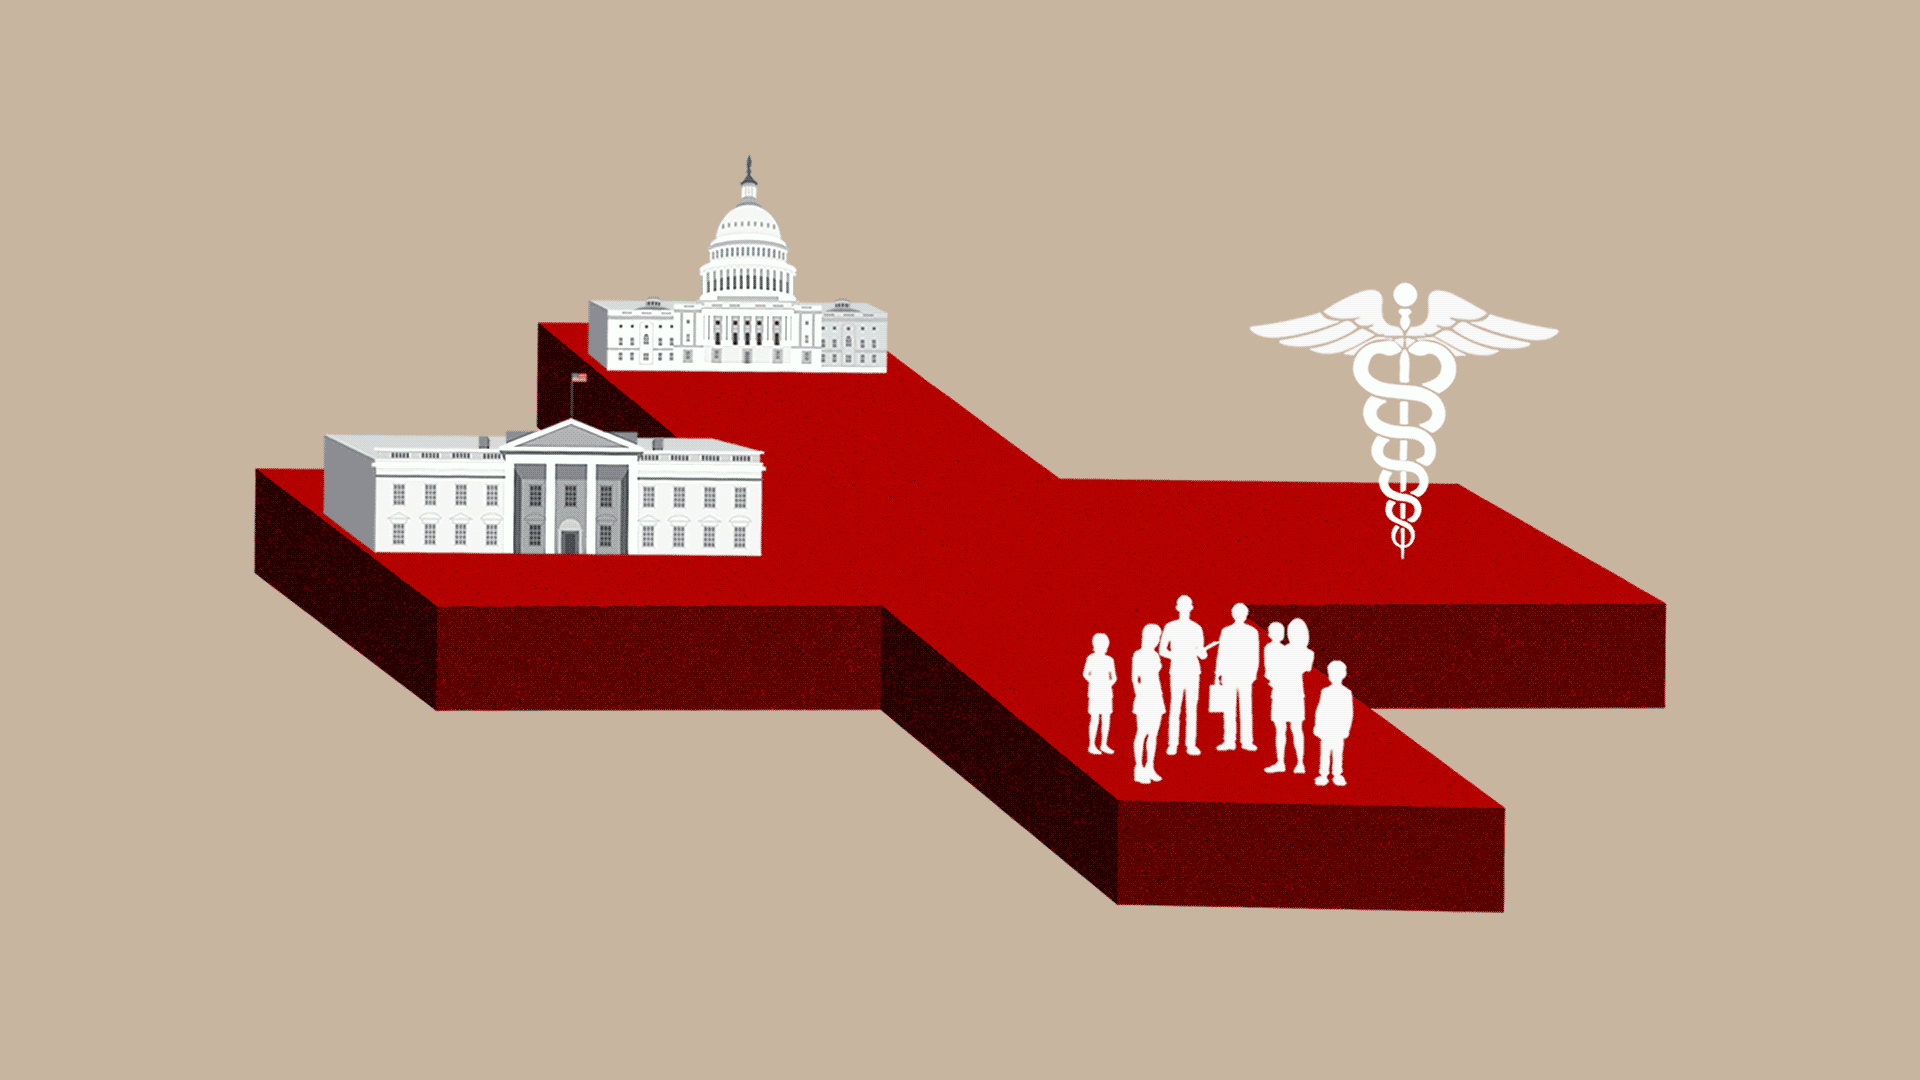 A red cross balancing the White House, Capital Building, a caduceus, and a group of people